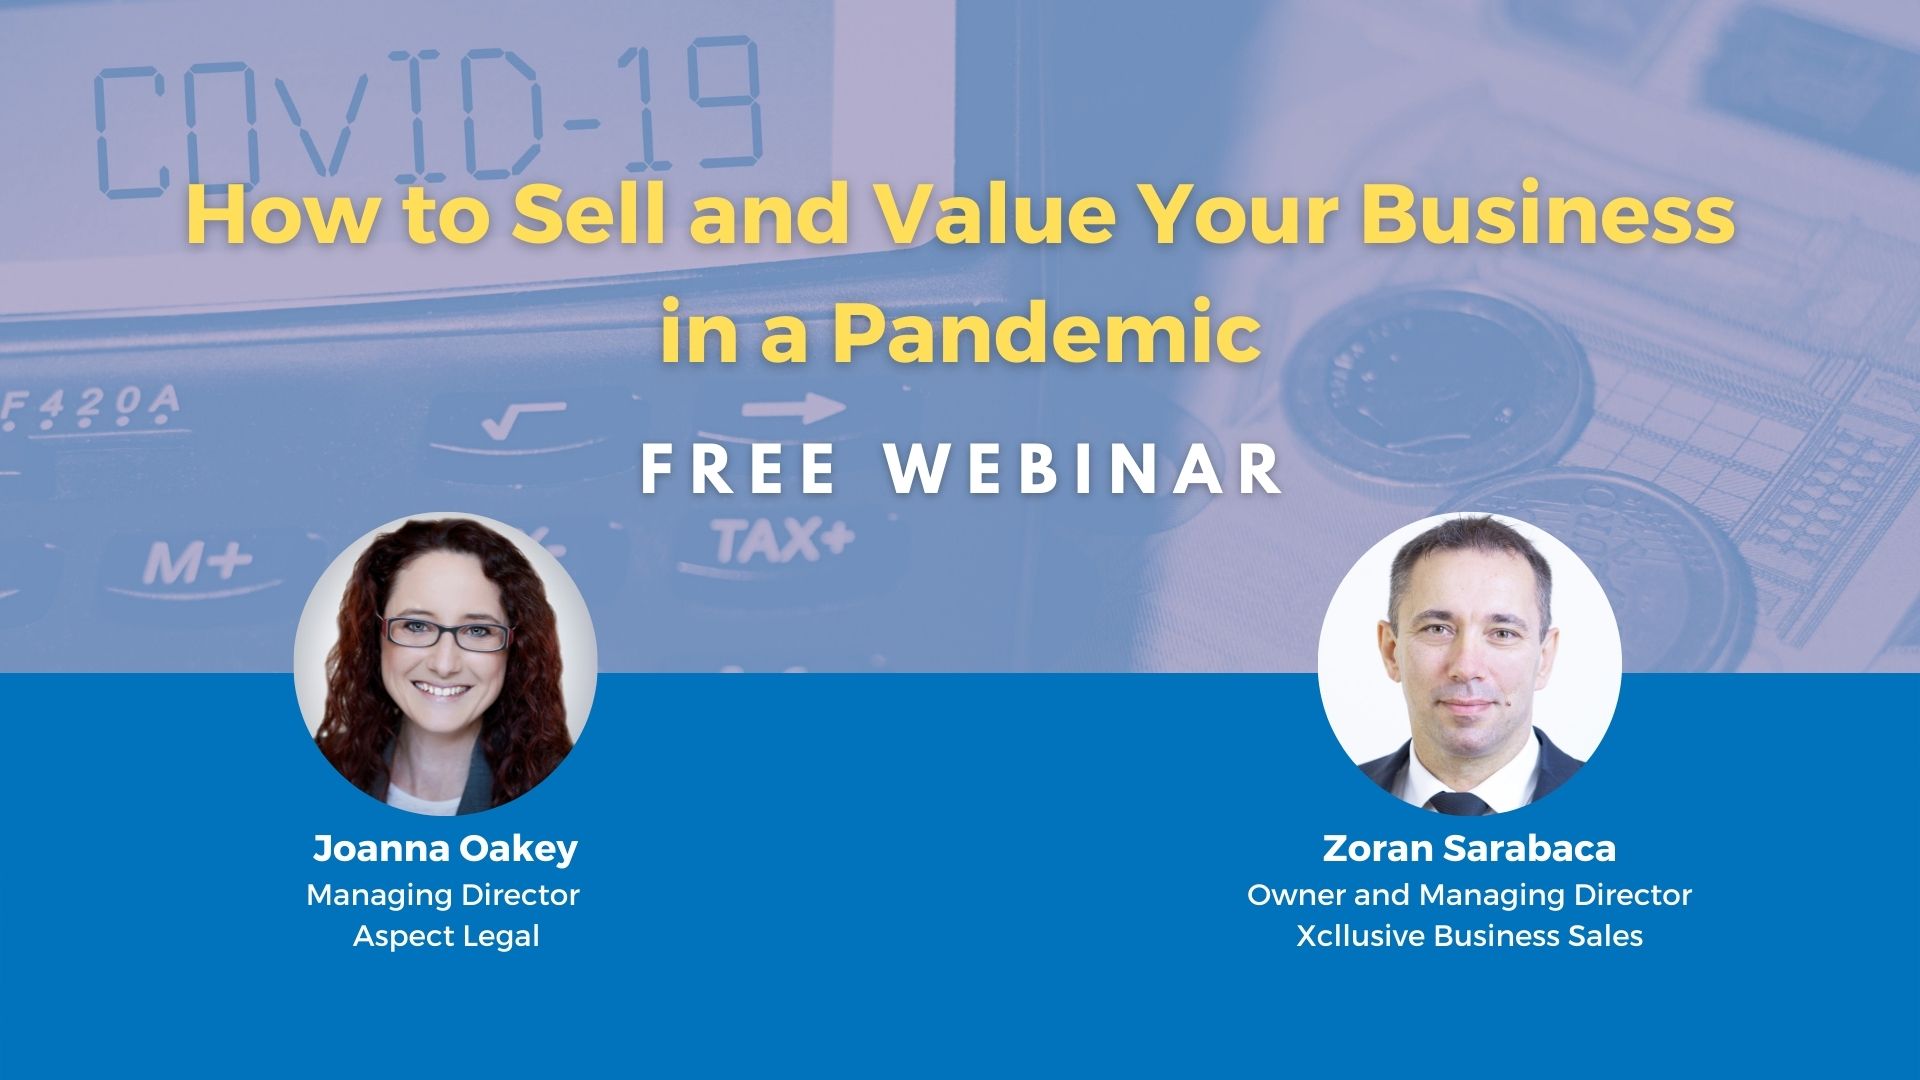 How to Sell and Value Your Business in a Pandemic